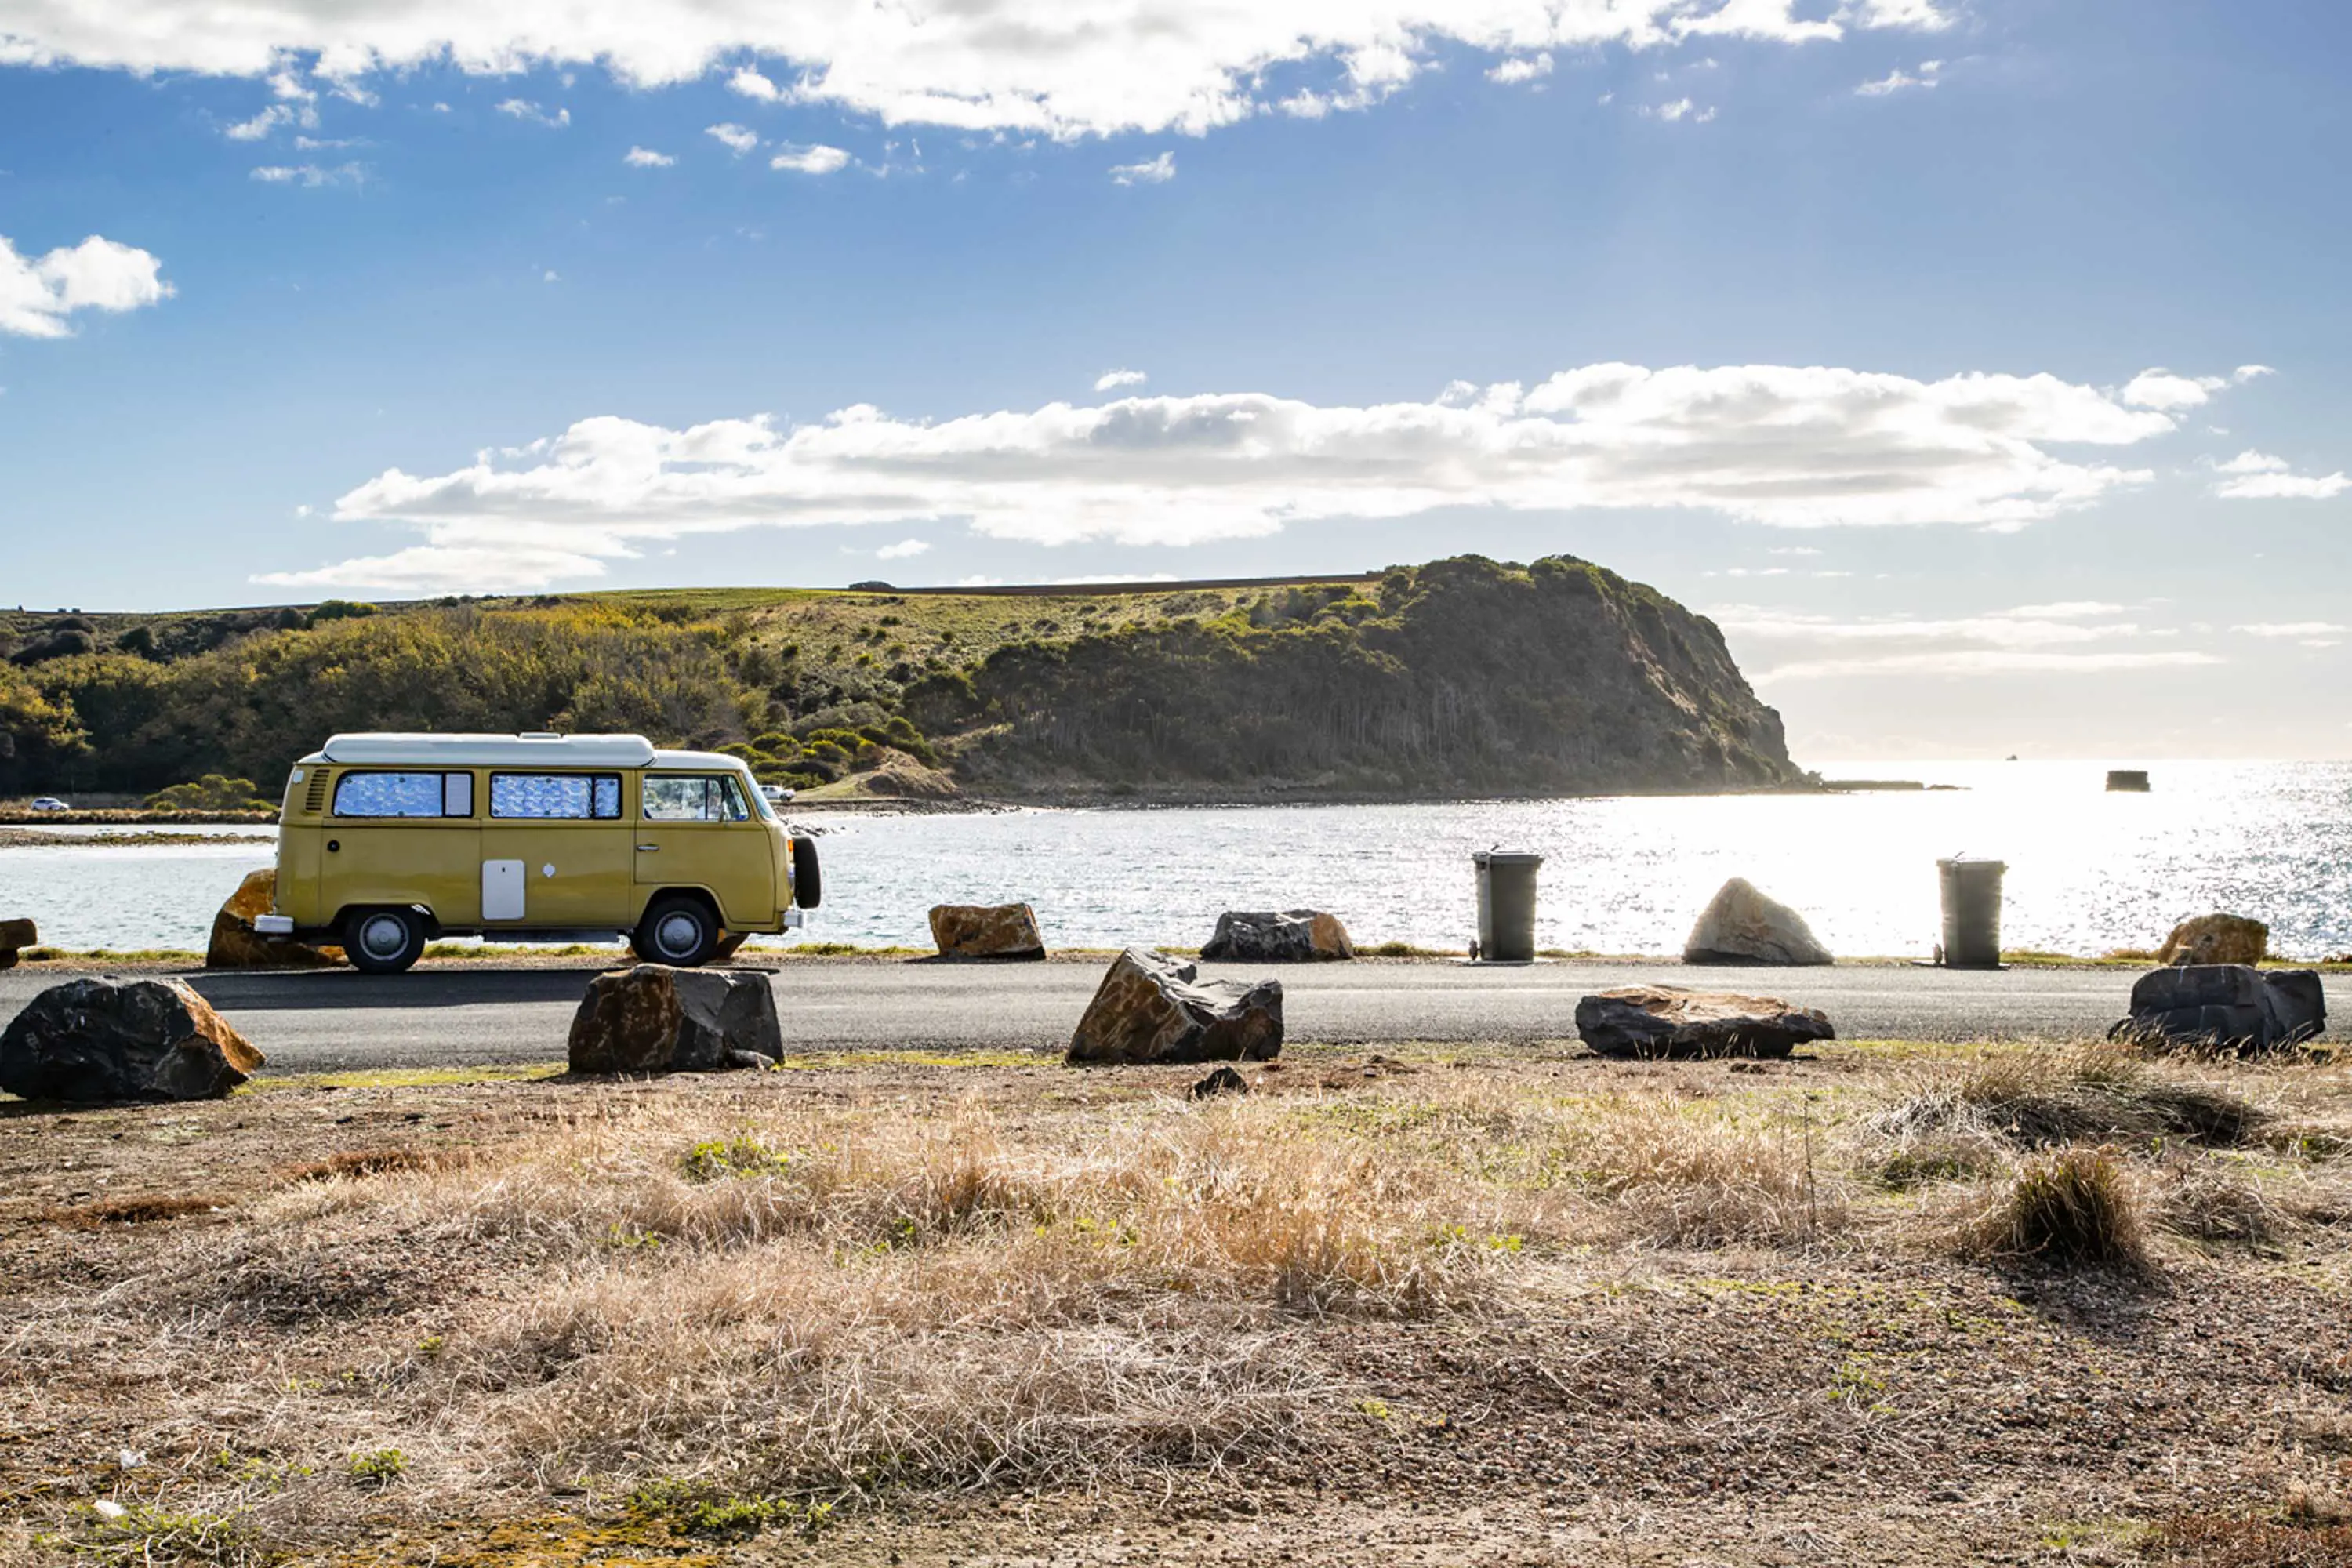 A yellow vintage van with a white roof parks on a road by the side of an inlet. A rocky peninsula in the distant background.